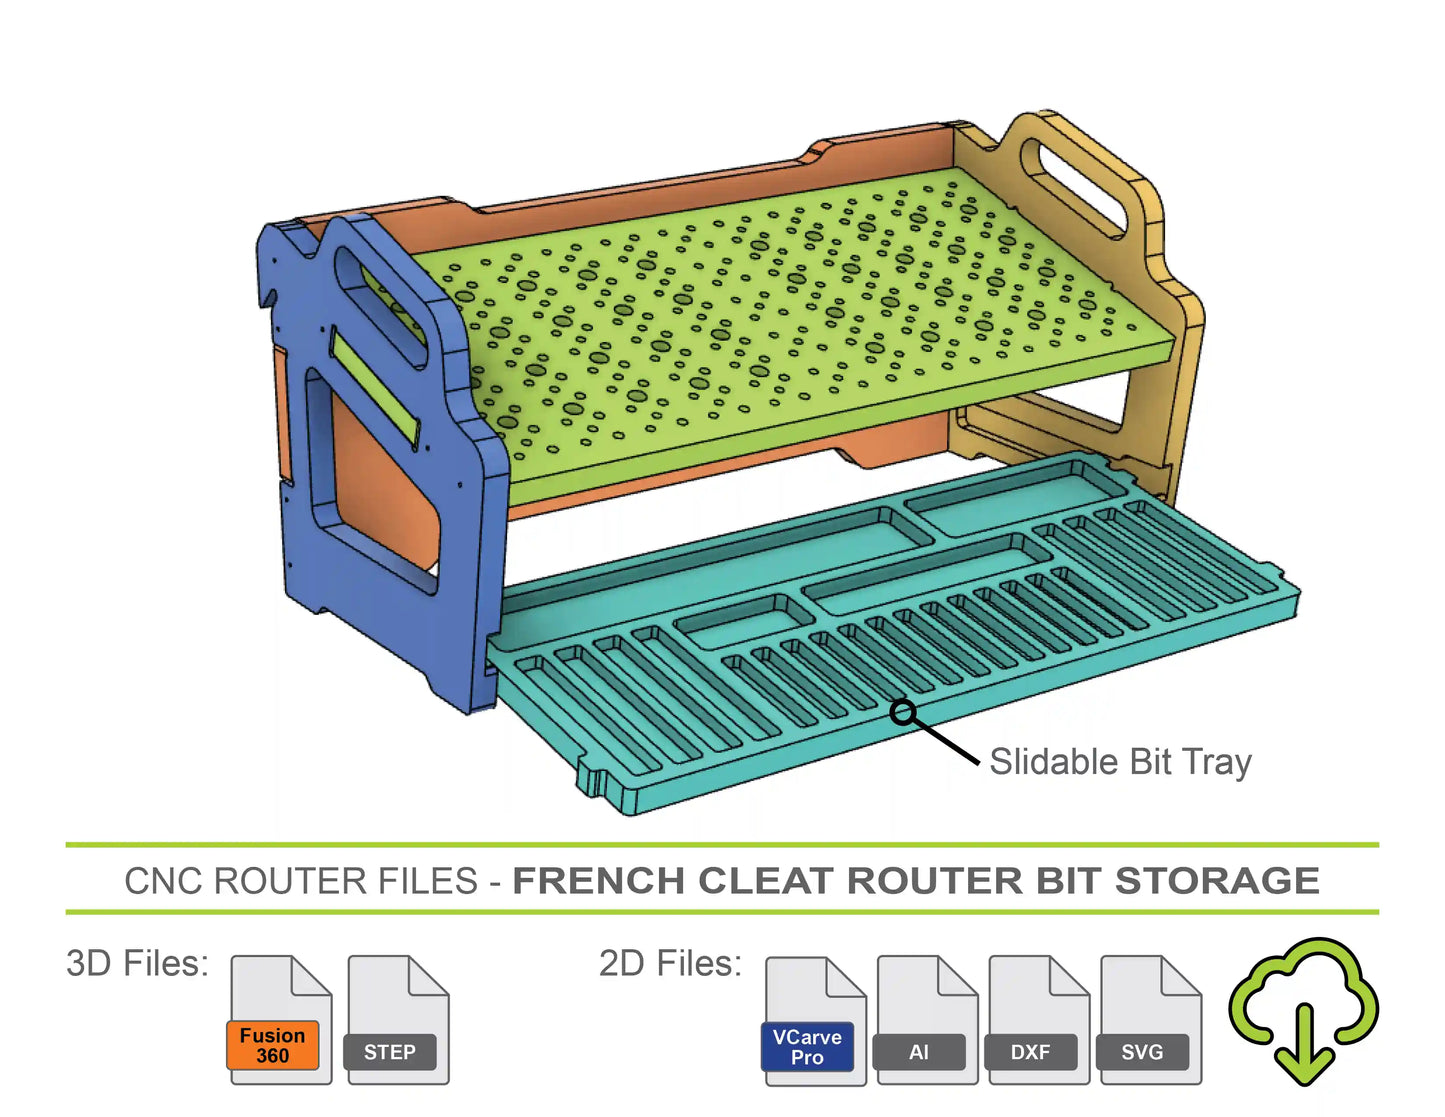 router bit organizer 3d modeled in fusion 360 to generate gcode to cut a french cleat router bit storage rack on a cnc wood cutting machine